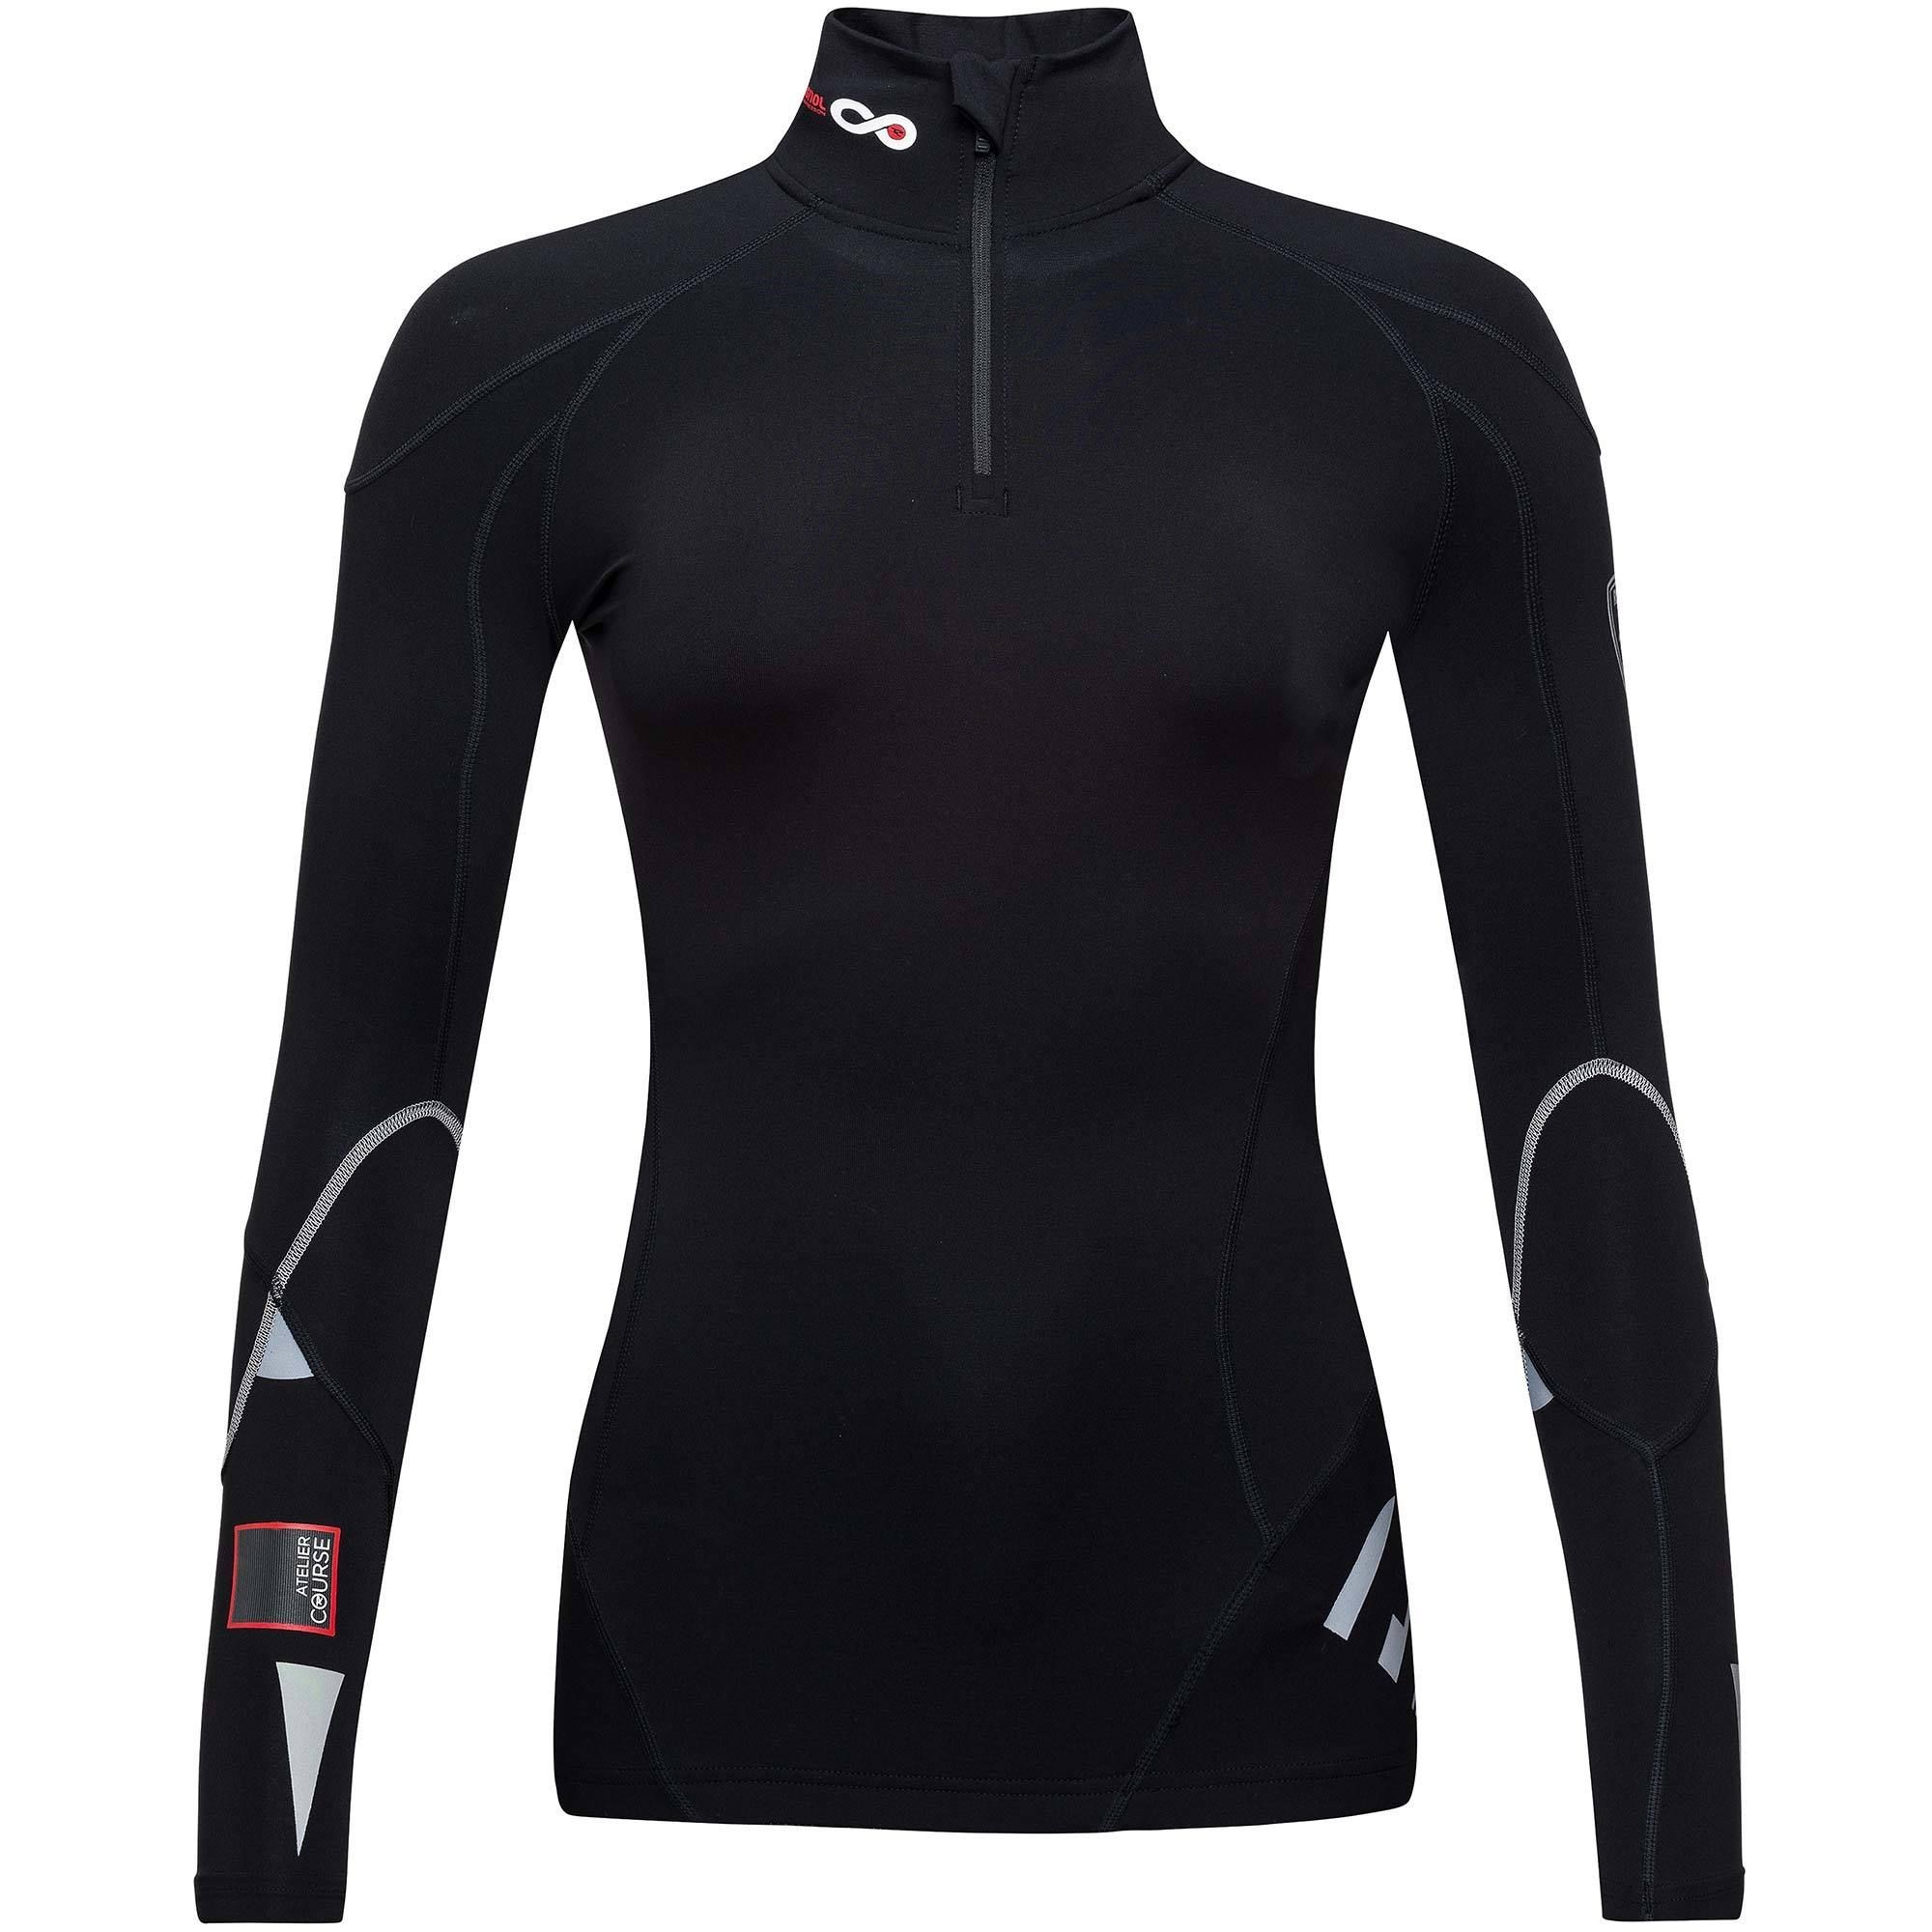 Rossignol Infini Compression Race Top - Base layer - Women's